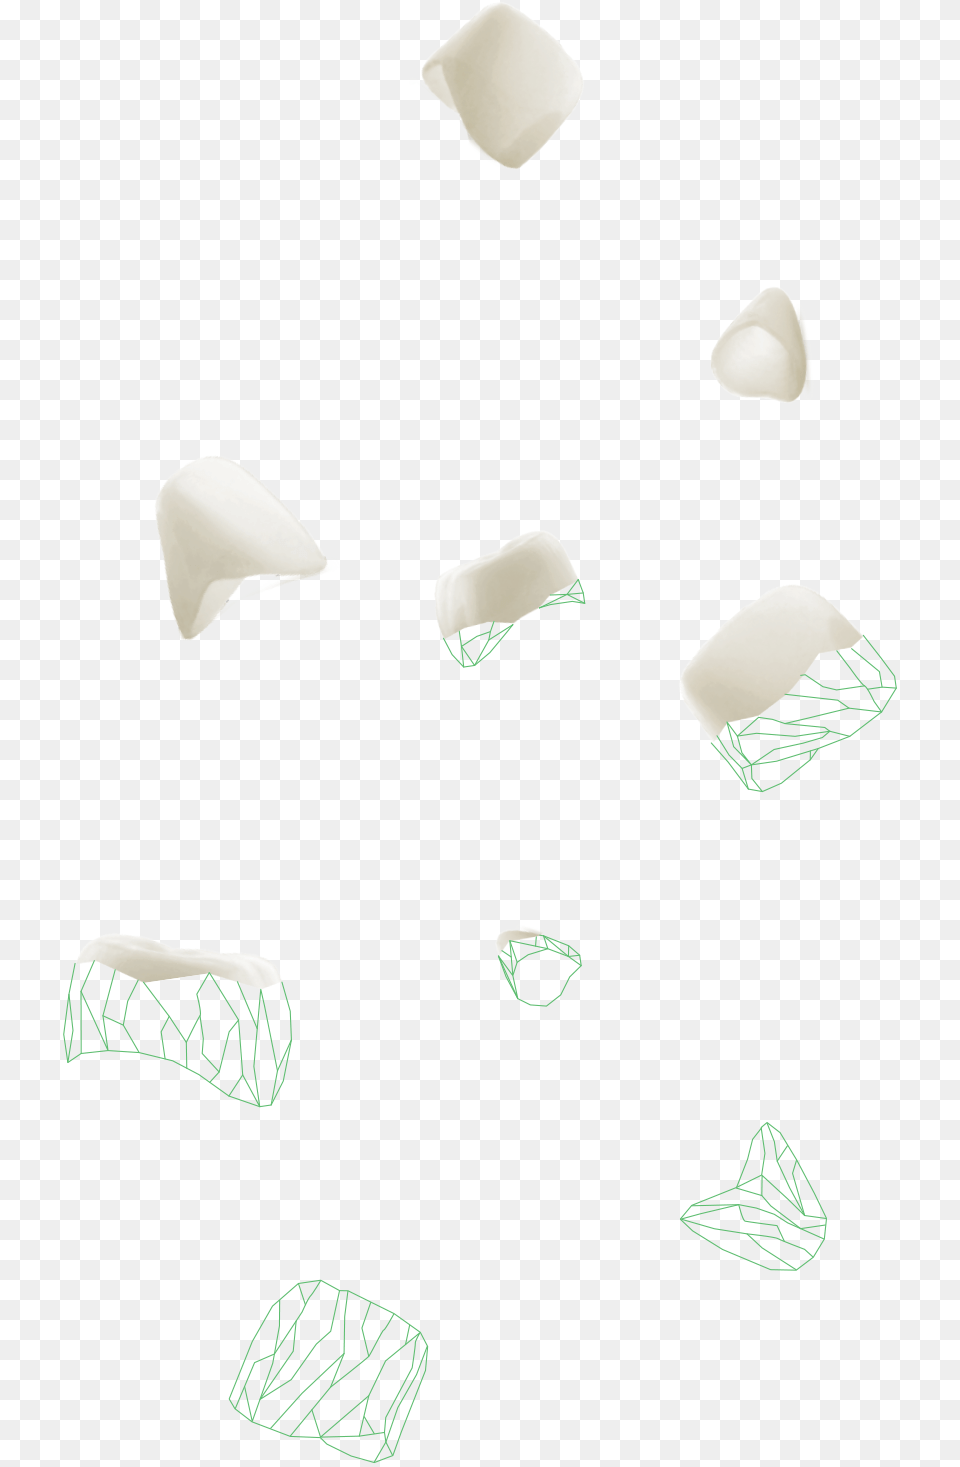 Ezcrowns Sketch Sketch, Ice, Outdoors, Nature Free Transparent Png